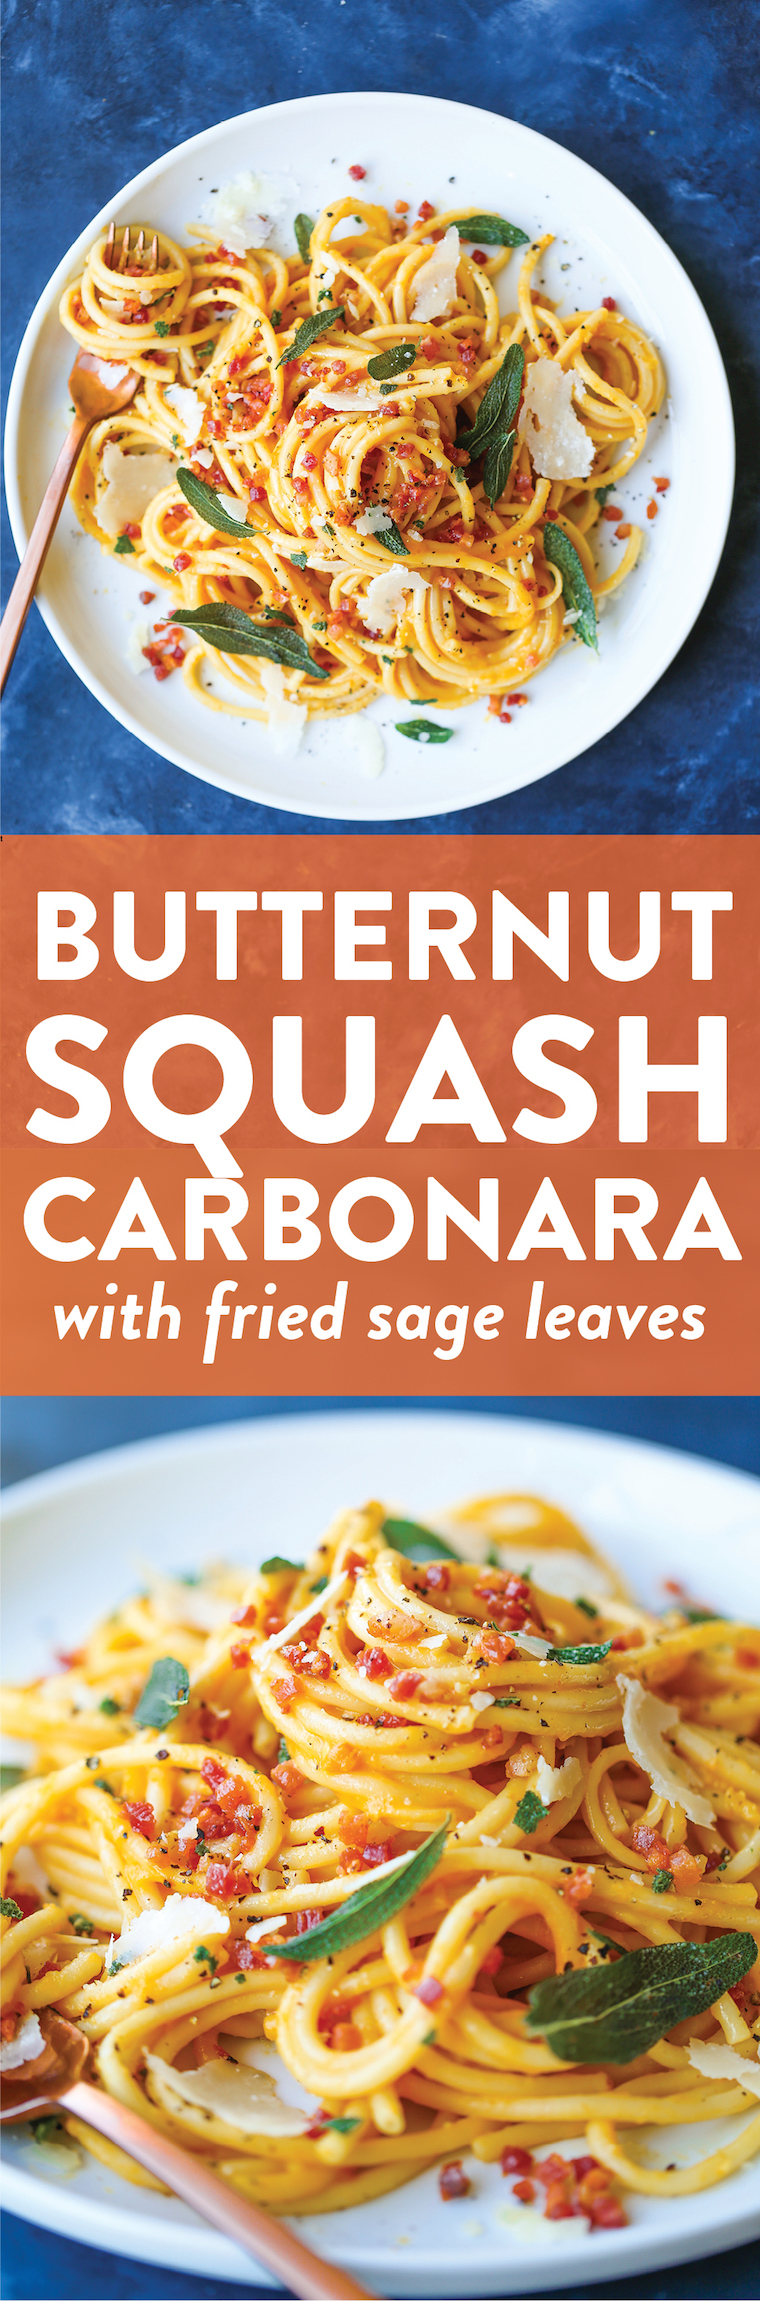 Butternut Squash Carbonara - If you love carbonara, you will love this! It is amazingly creamy and loaded with crispy pancetta and fried sage leaves!